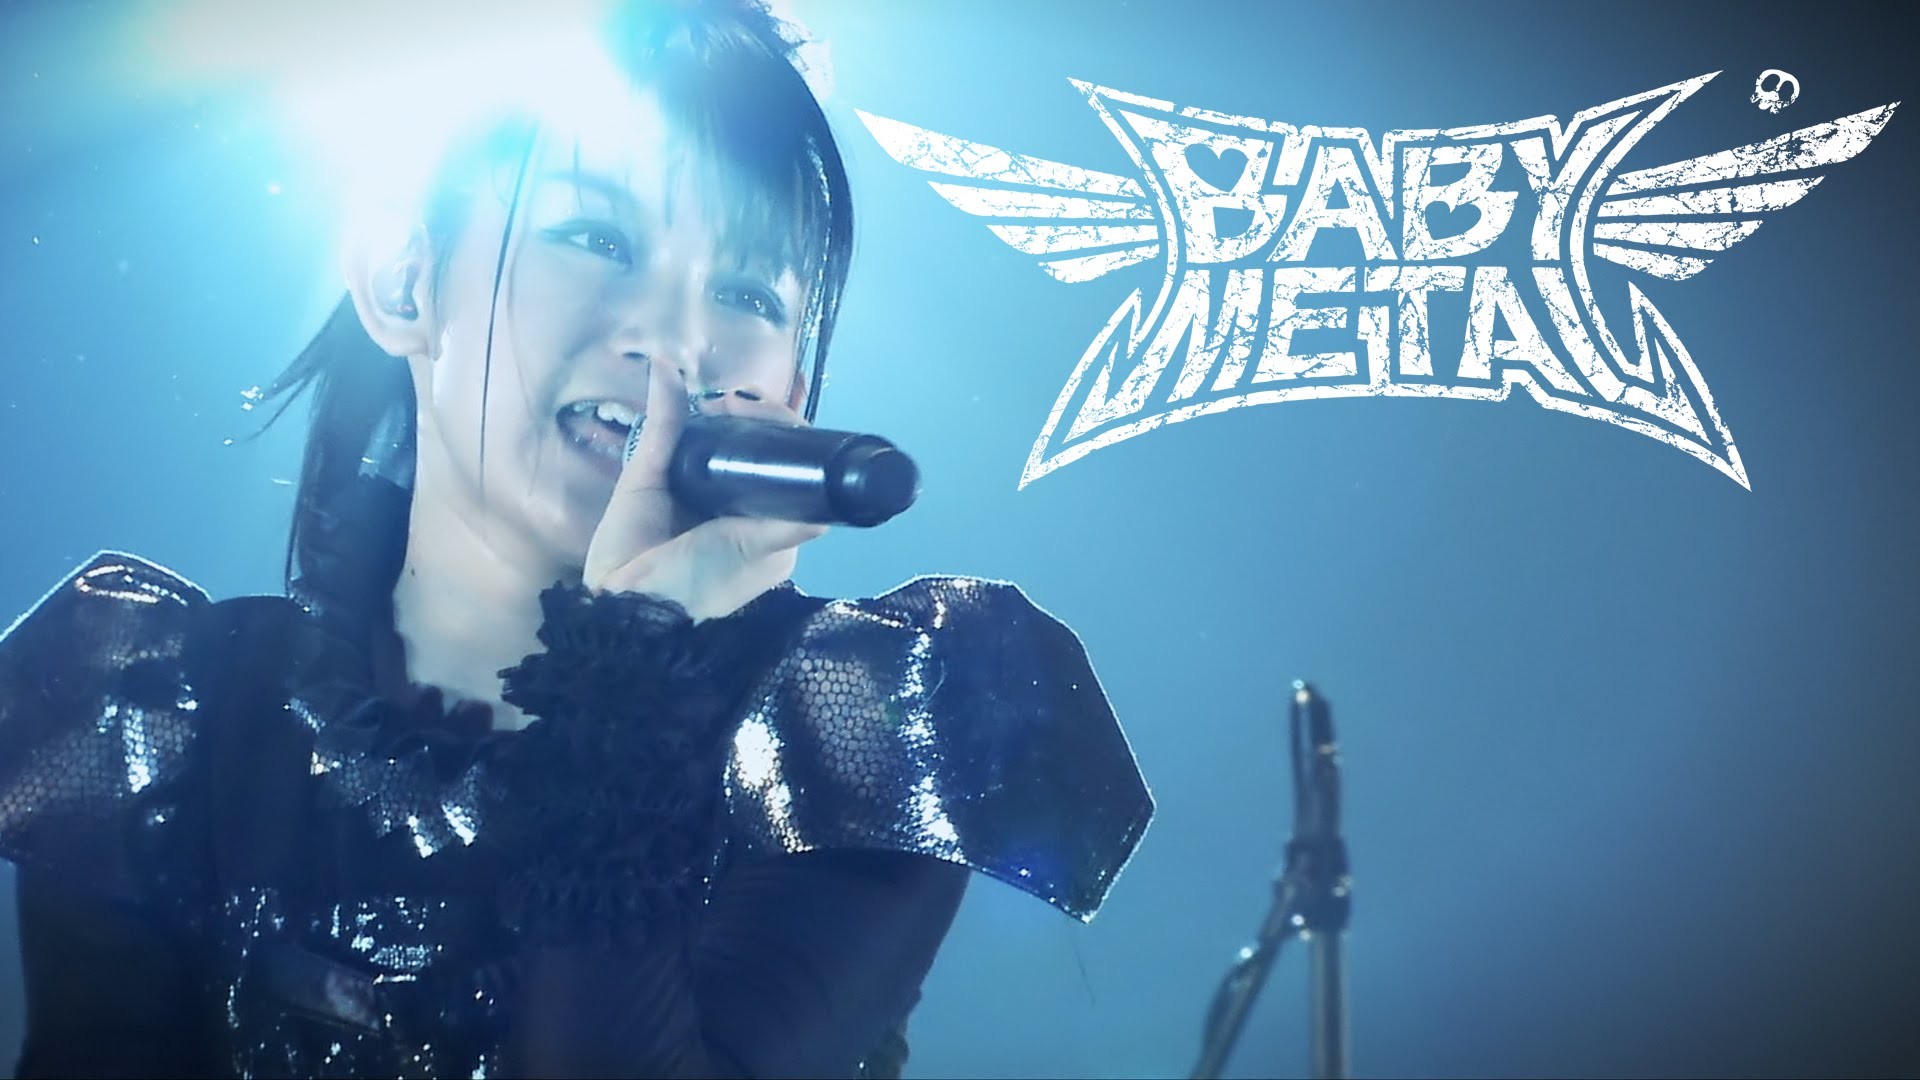 Official Music Video – The album BABYMETAL – OUT NOW! – YouTube